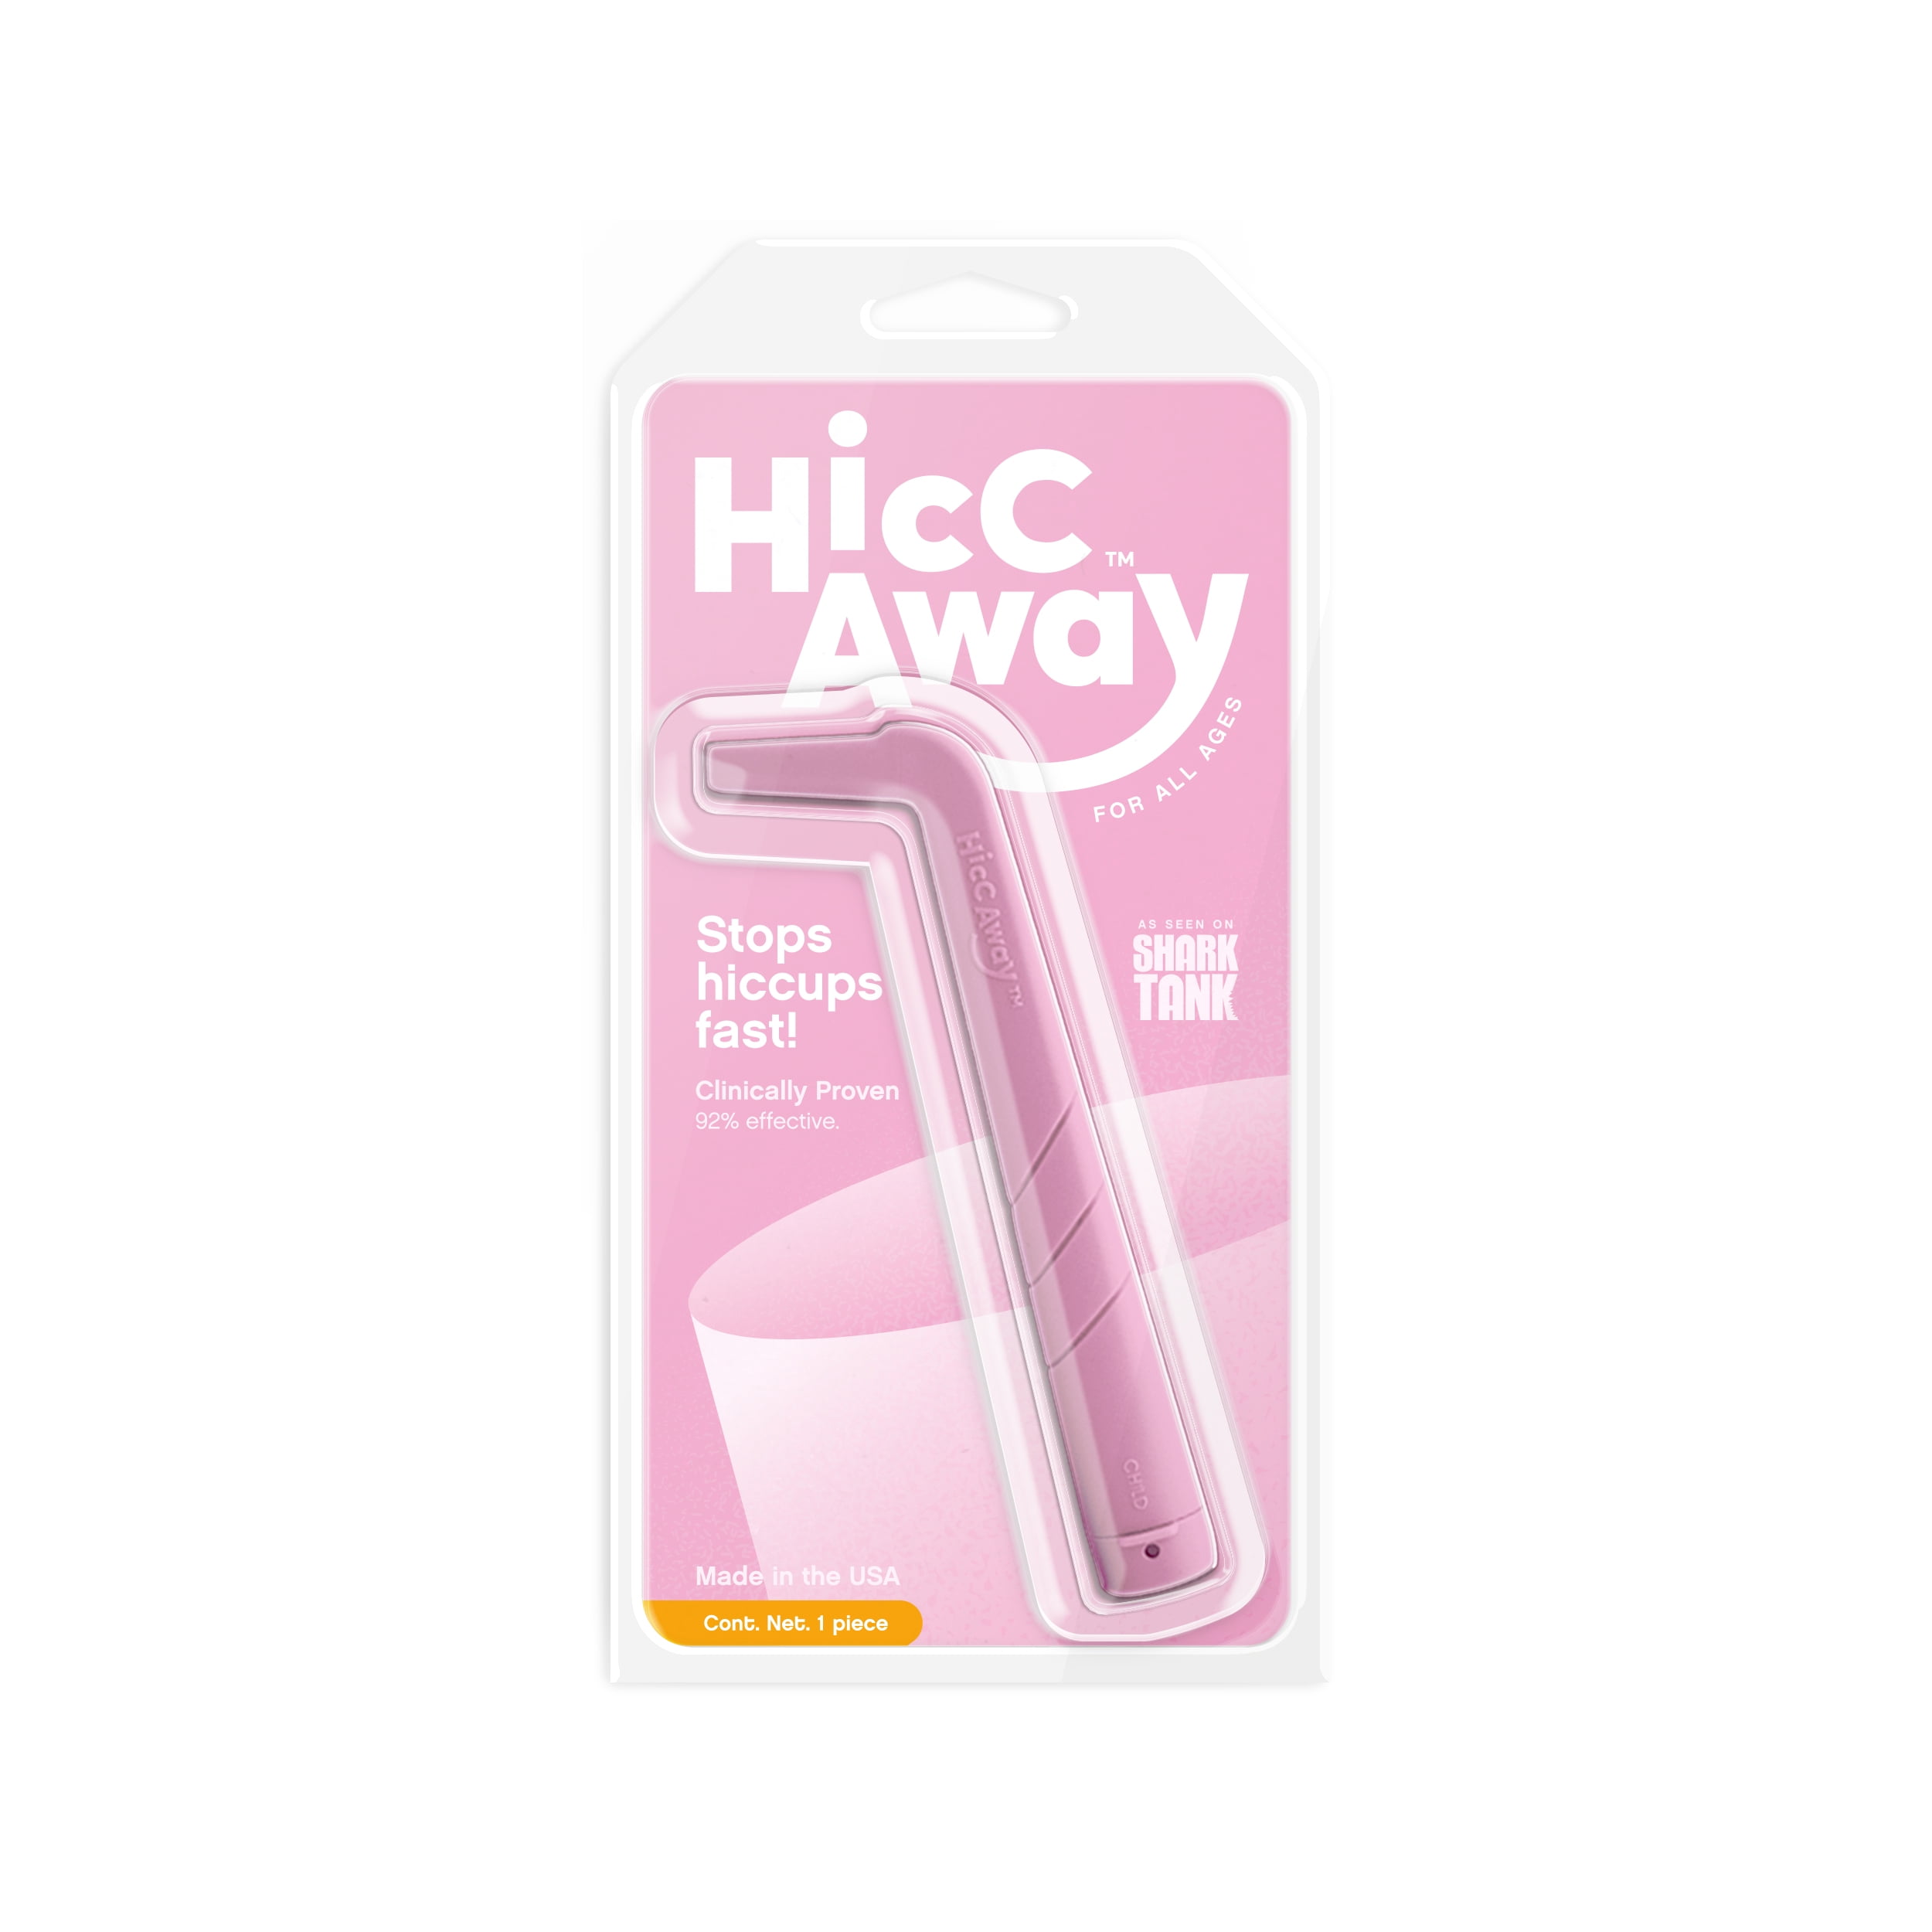  HiccAway Hiccup Straw Stops hiccups Fast! Clinically Proven  Hiccup Relief for All Ages. Shark Tank Backed! : Health & Household